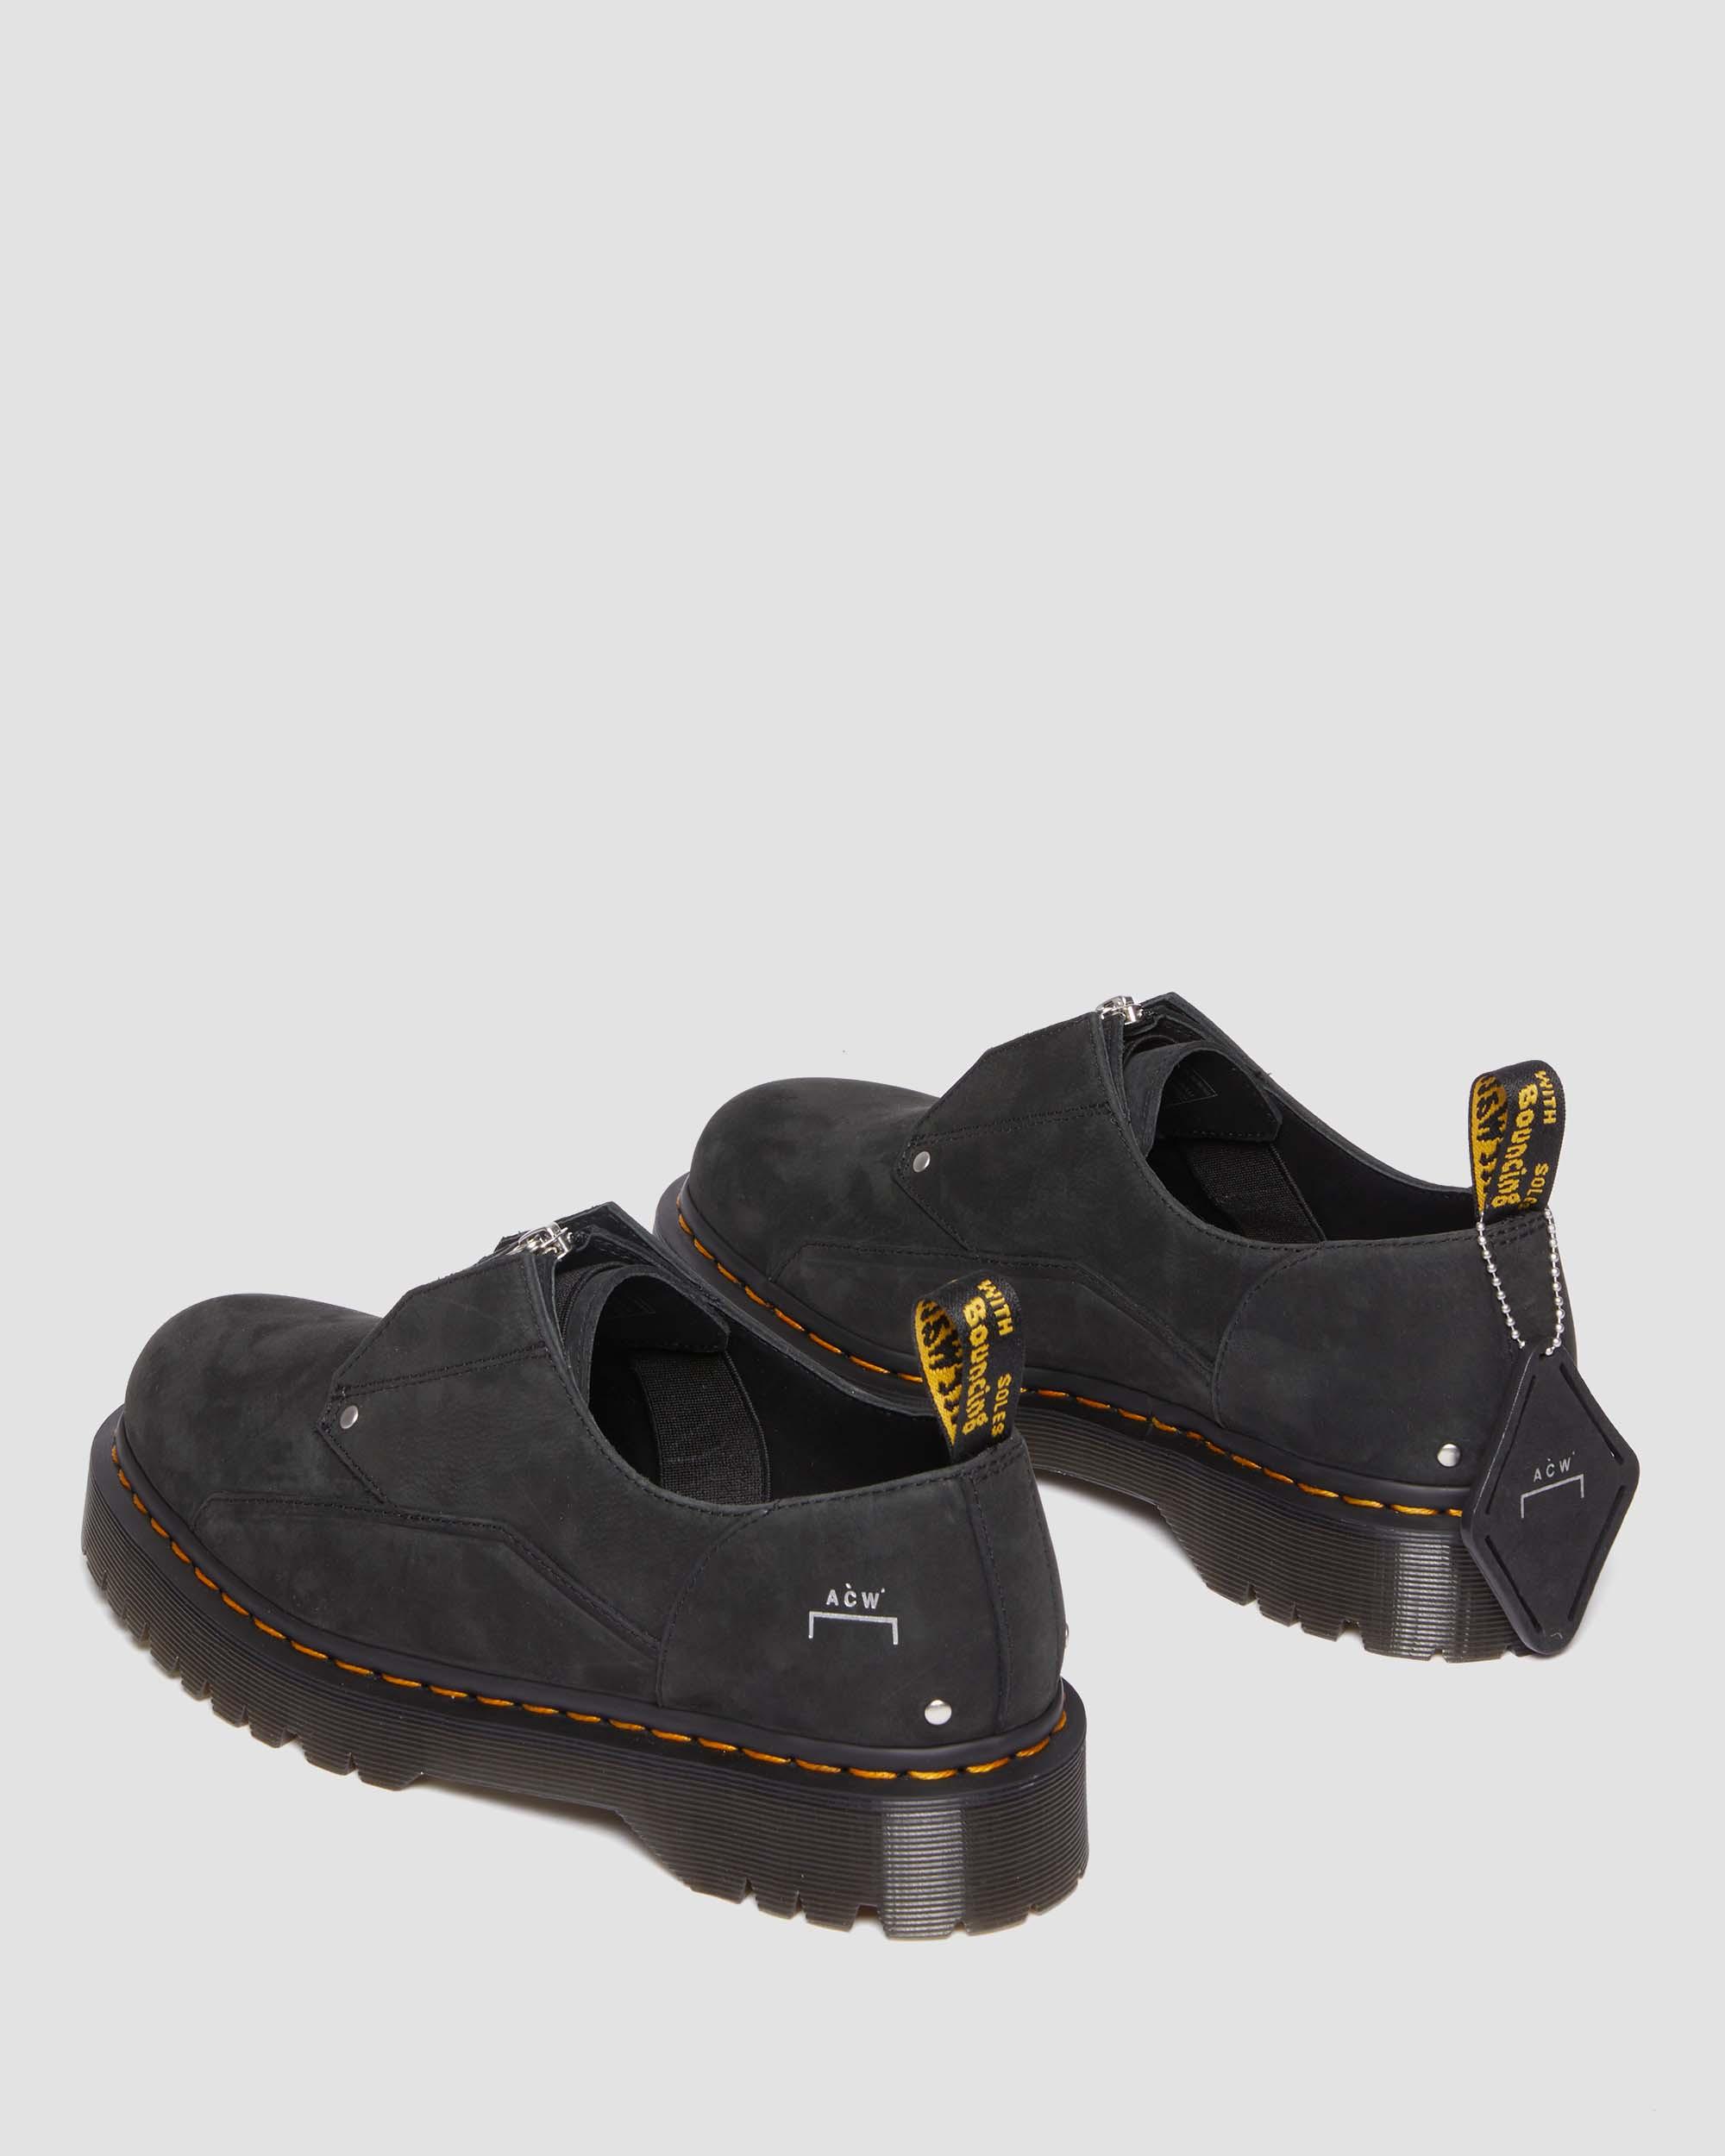 1461 Bex ACW* Leather Oxford Shoes in Black | Dr. Martens